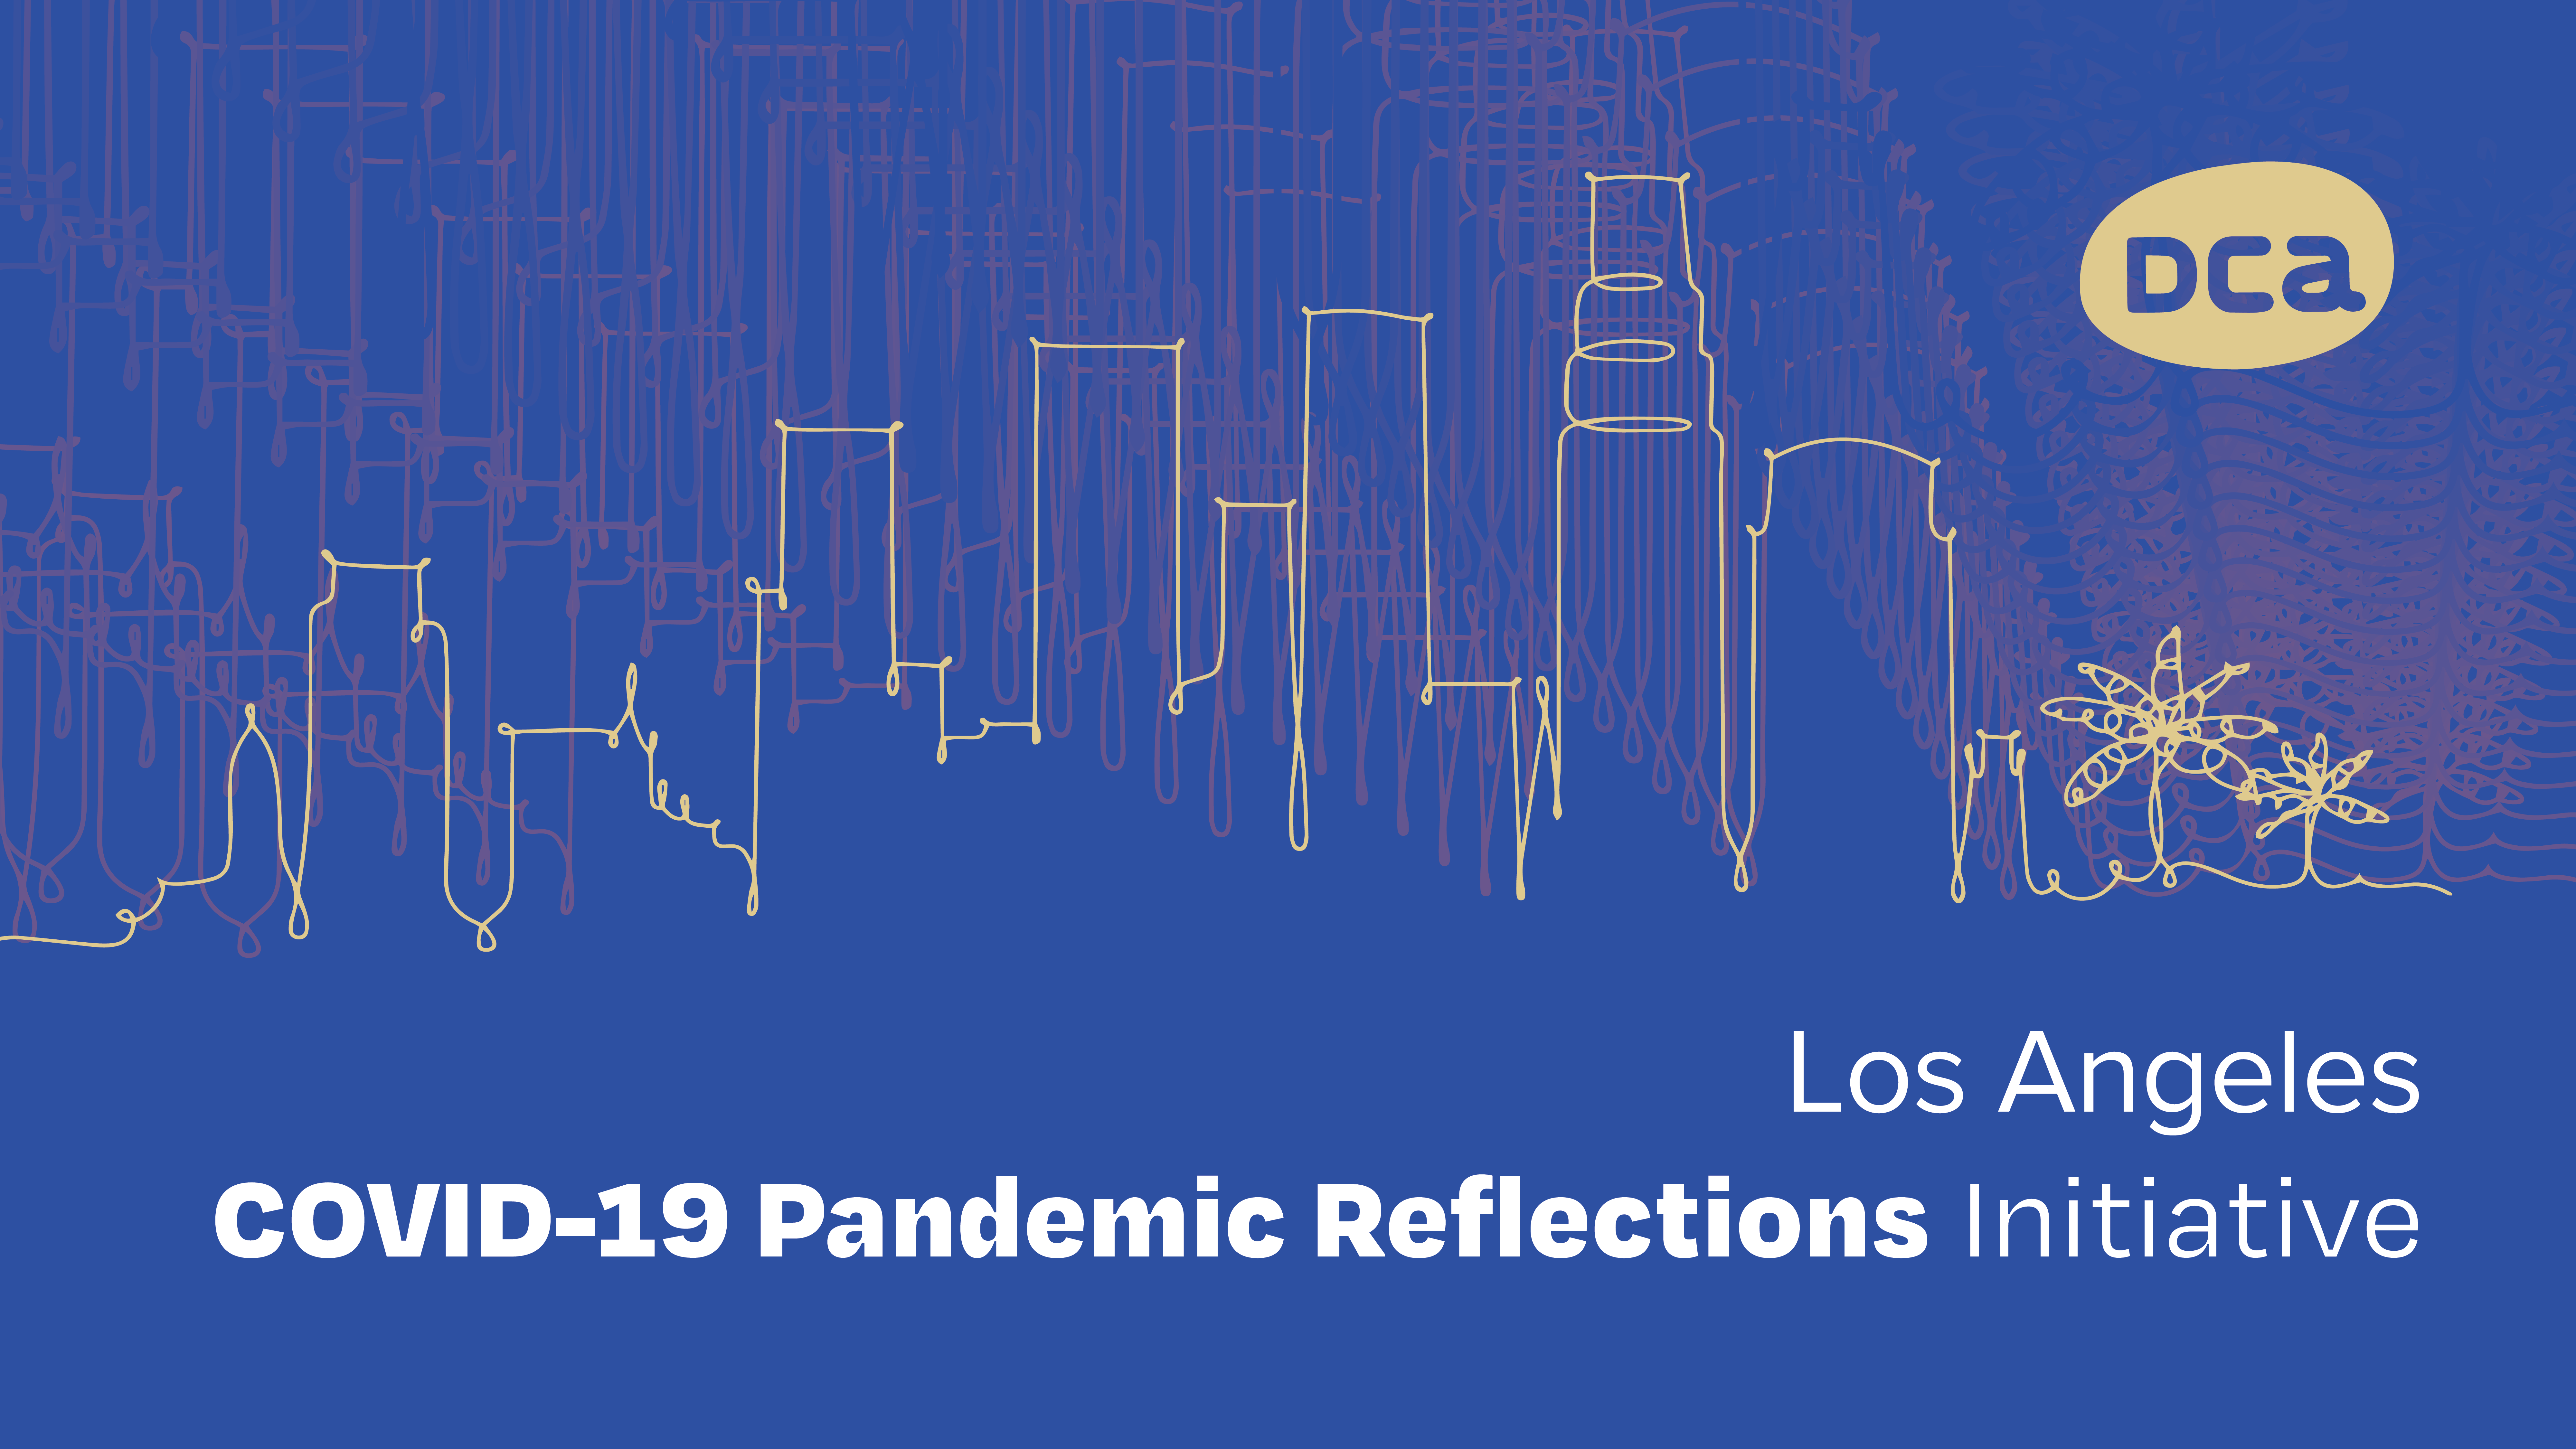 The image is a histogram related to the COVID-19 Pandemic Reflections Initiative in Los Angeles. It contains text and graphics related to this initiative.